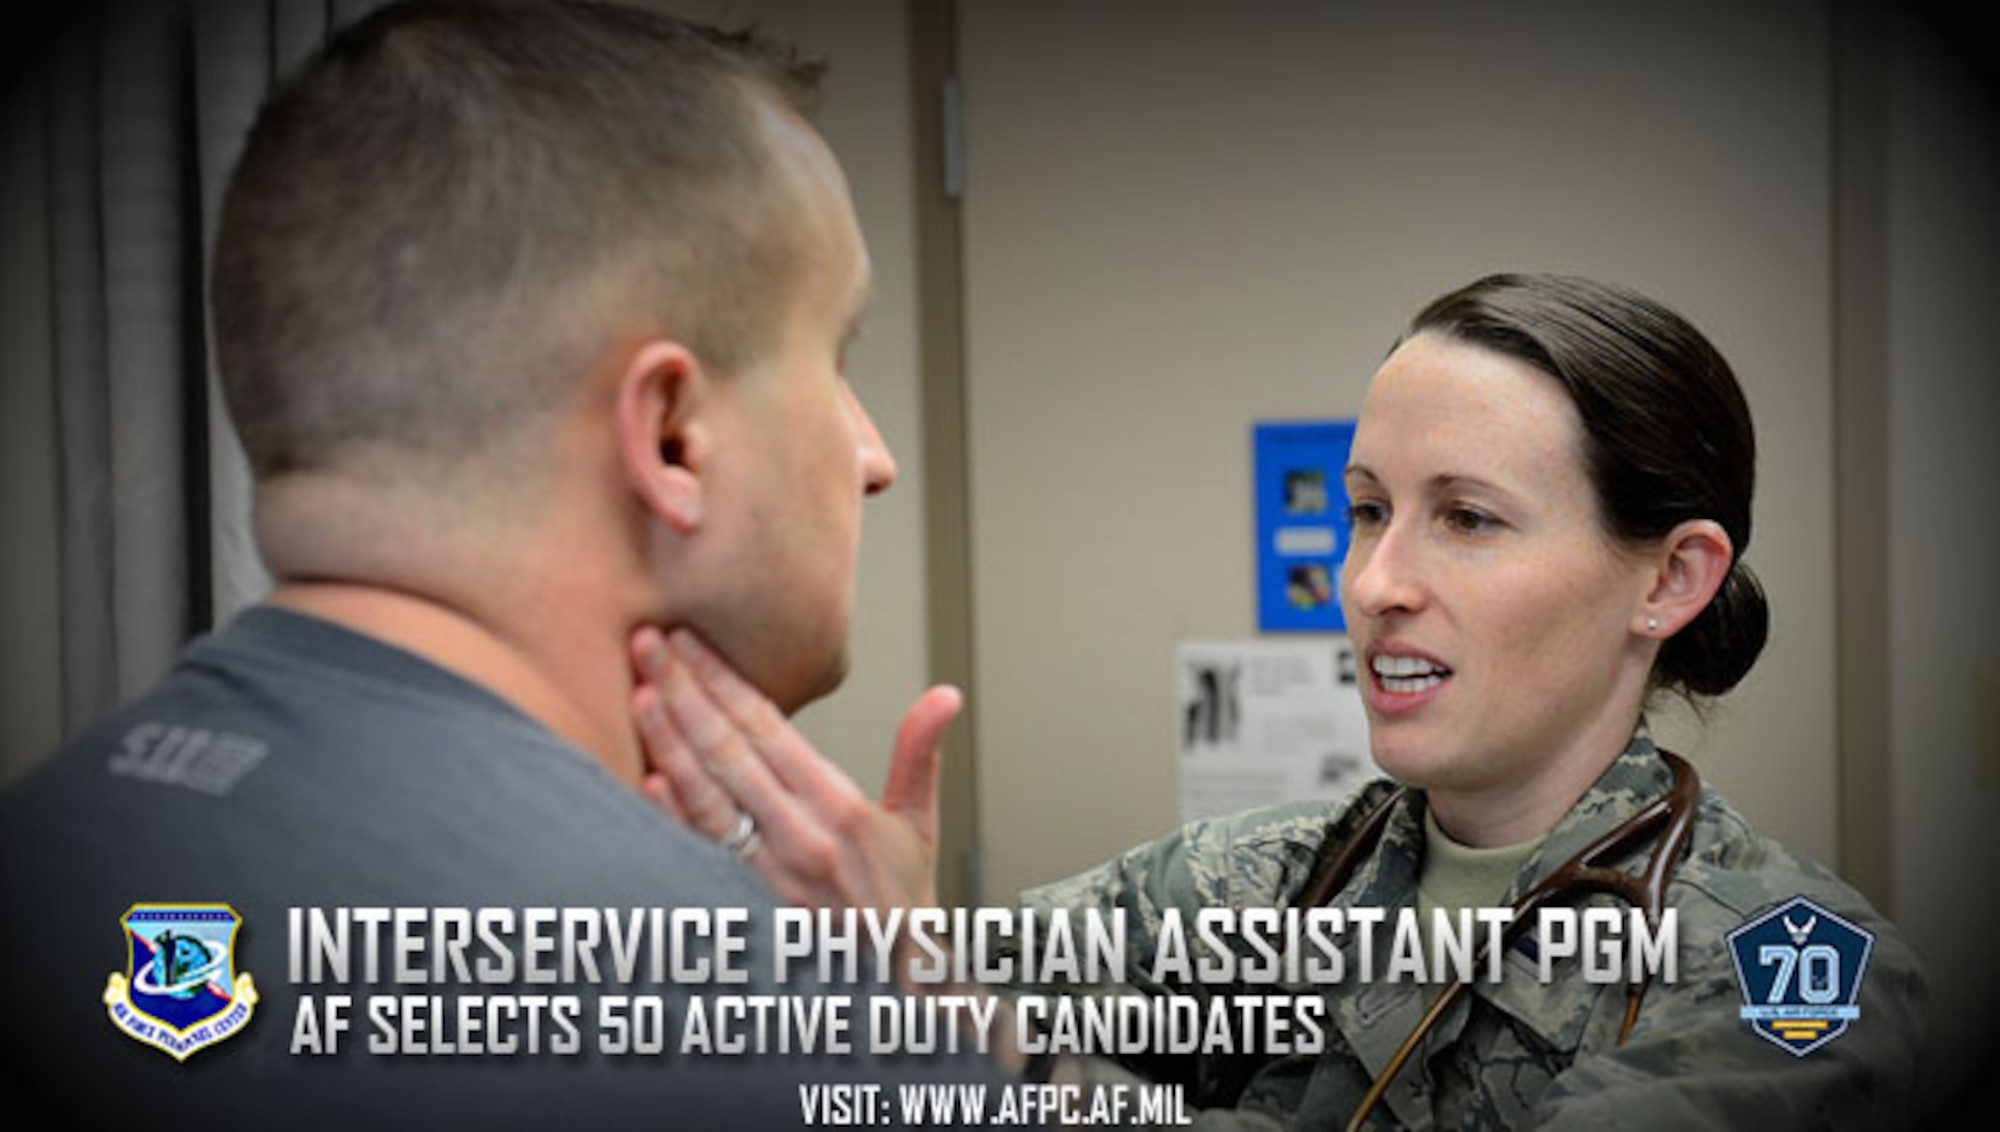 Back in 1966, the lack of medical doctors in both the military and civilian health care systems led to the development of the physician assistant. Today, the Interservice Physician Assistant Program provides the uniformed services with highly competent and compassionate physician assistants. Fifty active-duty Airmen were just selected as candidates for the training program. (U.S. Air Force courtesy photo)